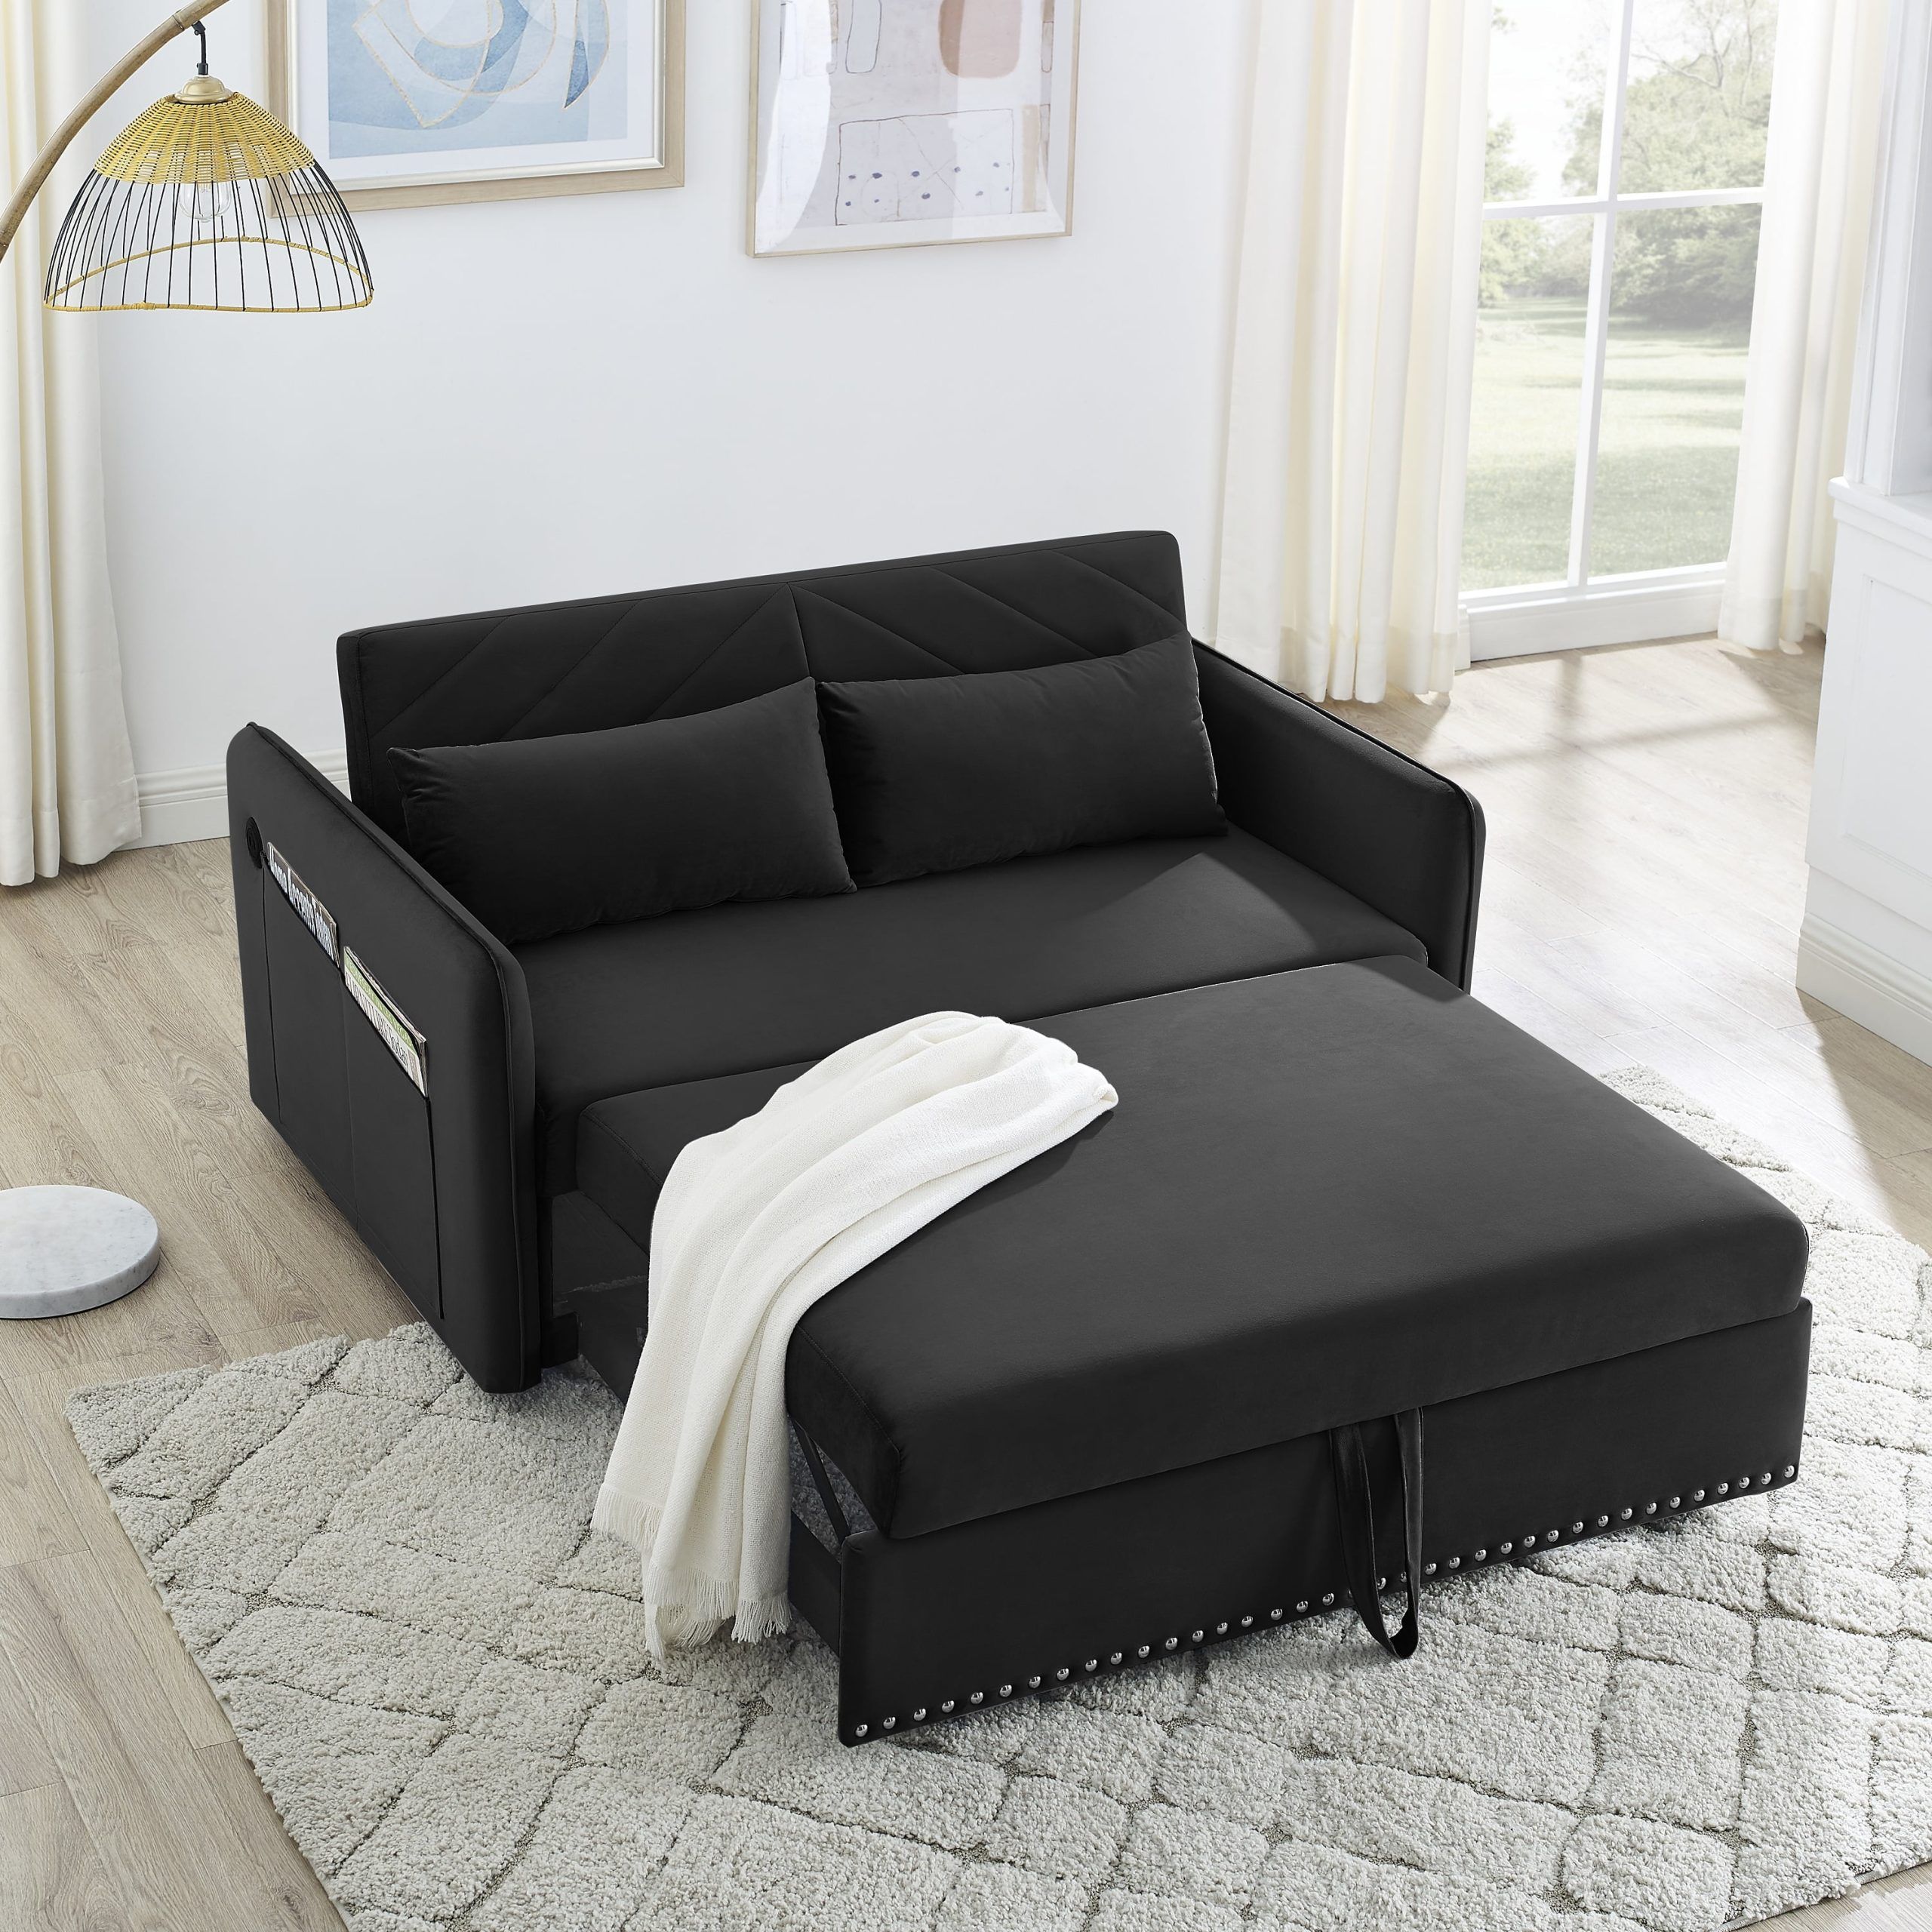 Momspeace 3 In 1 Sleeper Sofa Couch Bed With 2 Usb Ports, 55" Velvet  Convertible Loveseat With Pull Out Sofa Bed For Living Room – Black –  Walmart With 3 In 1 Gray Pull Out Sleeper Sofas (View 8 of 15)